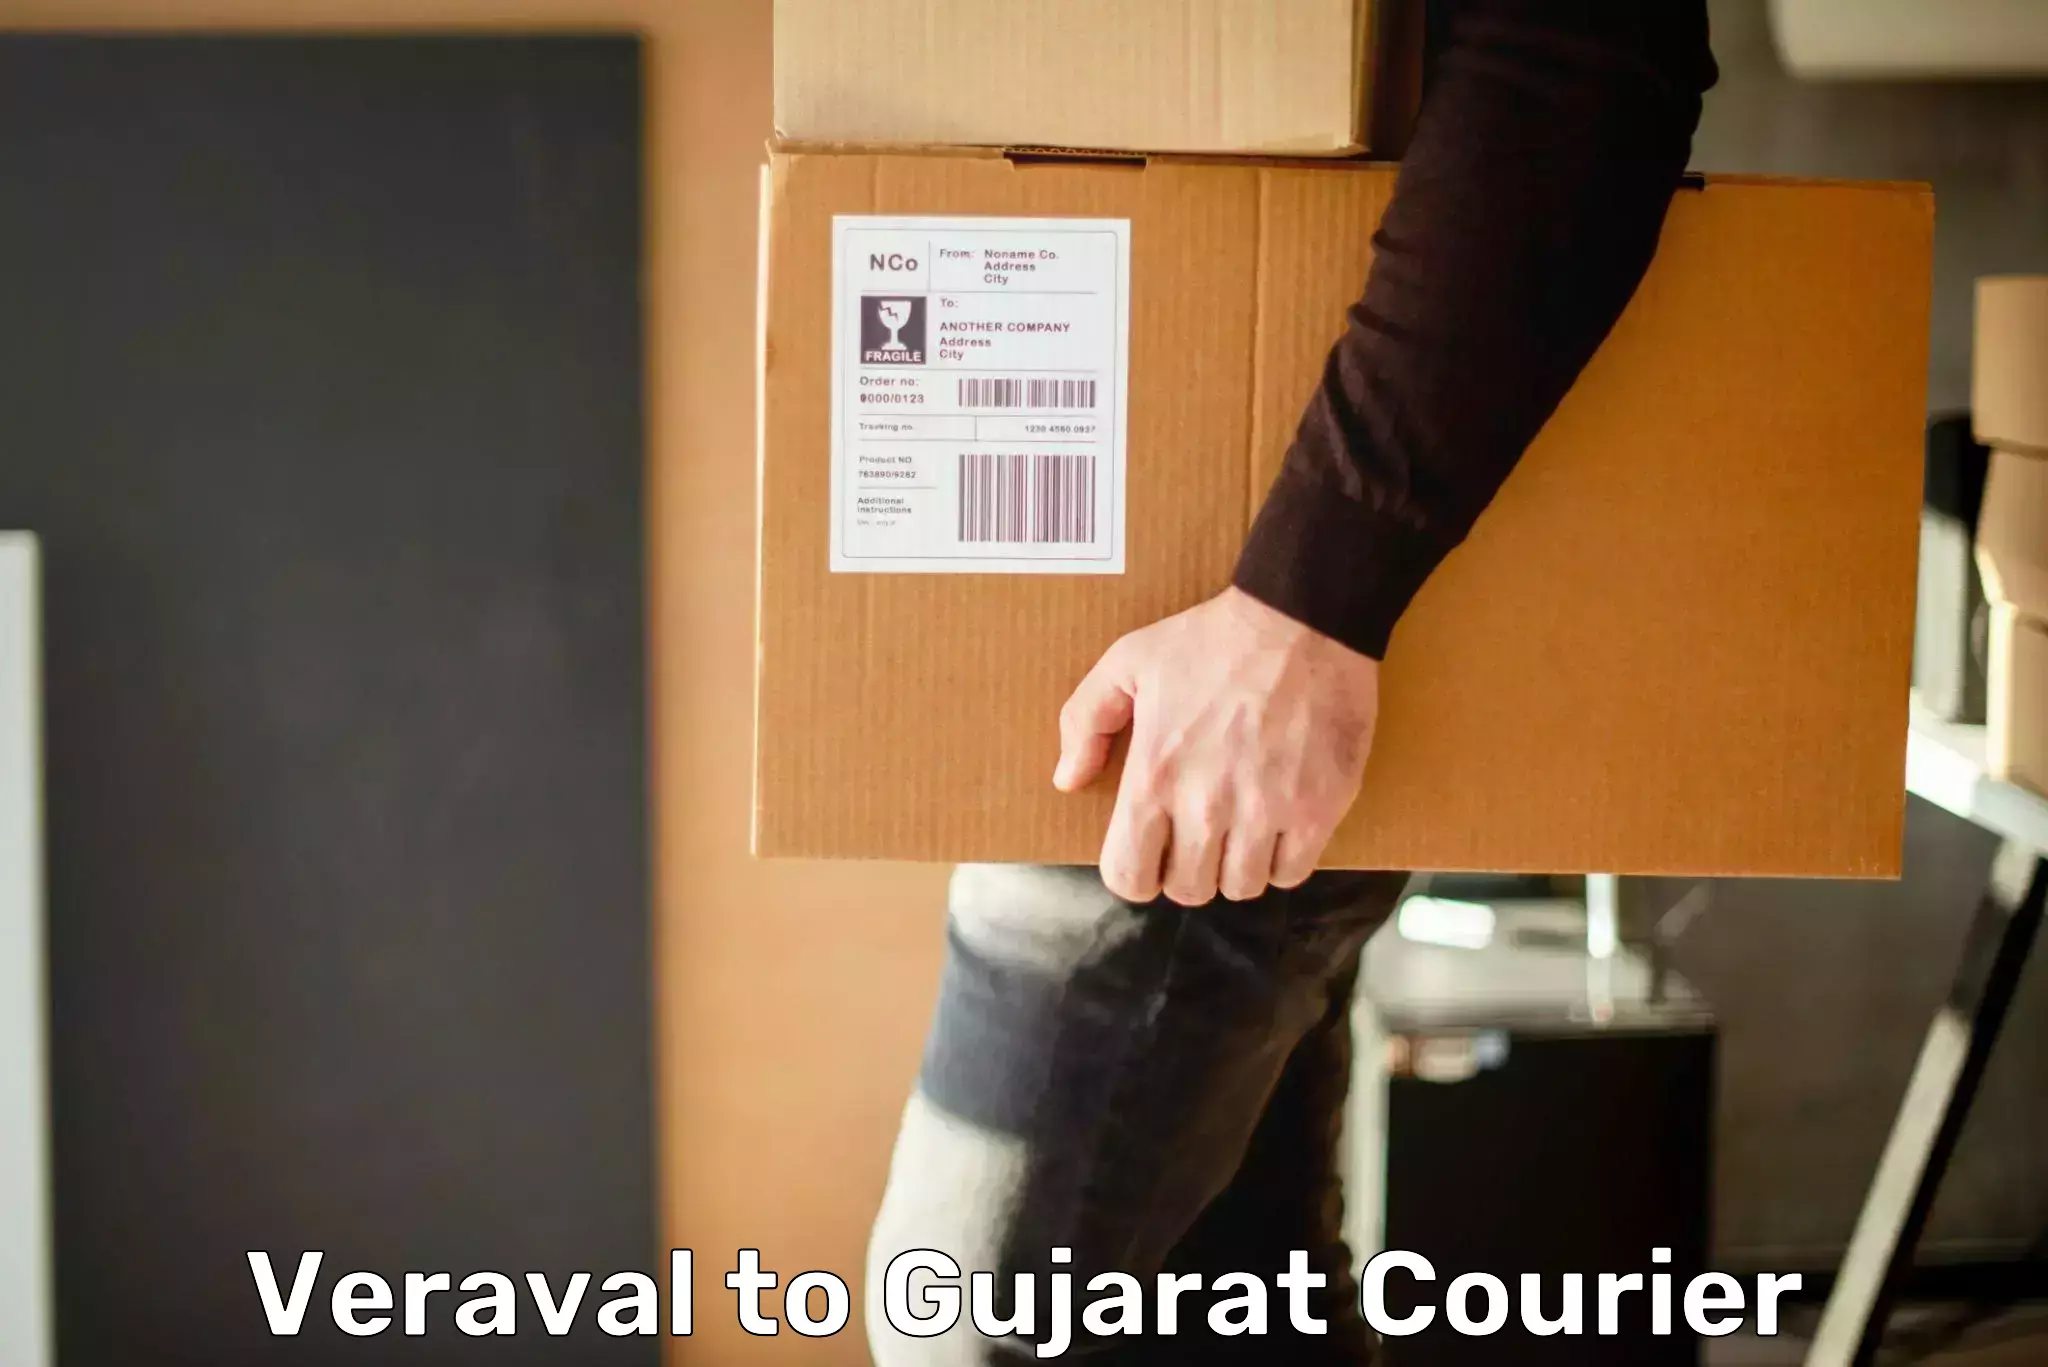 Reliable package handling Veraval to Ahmedabad